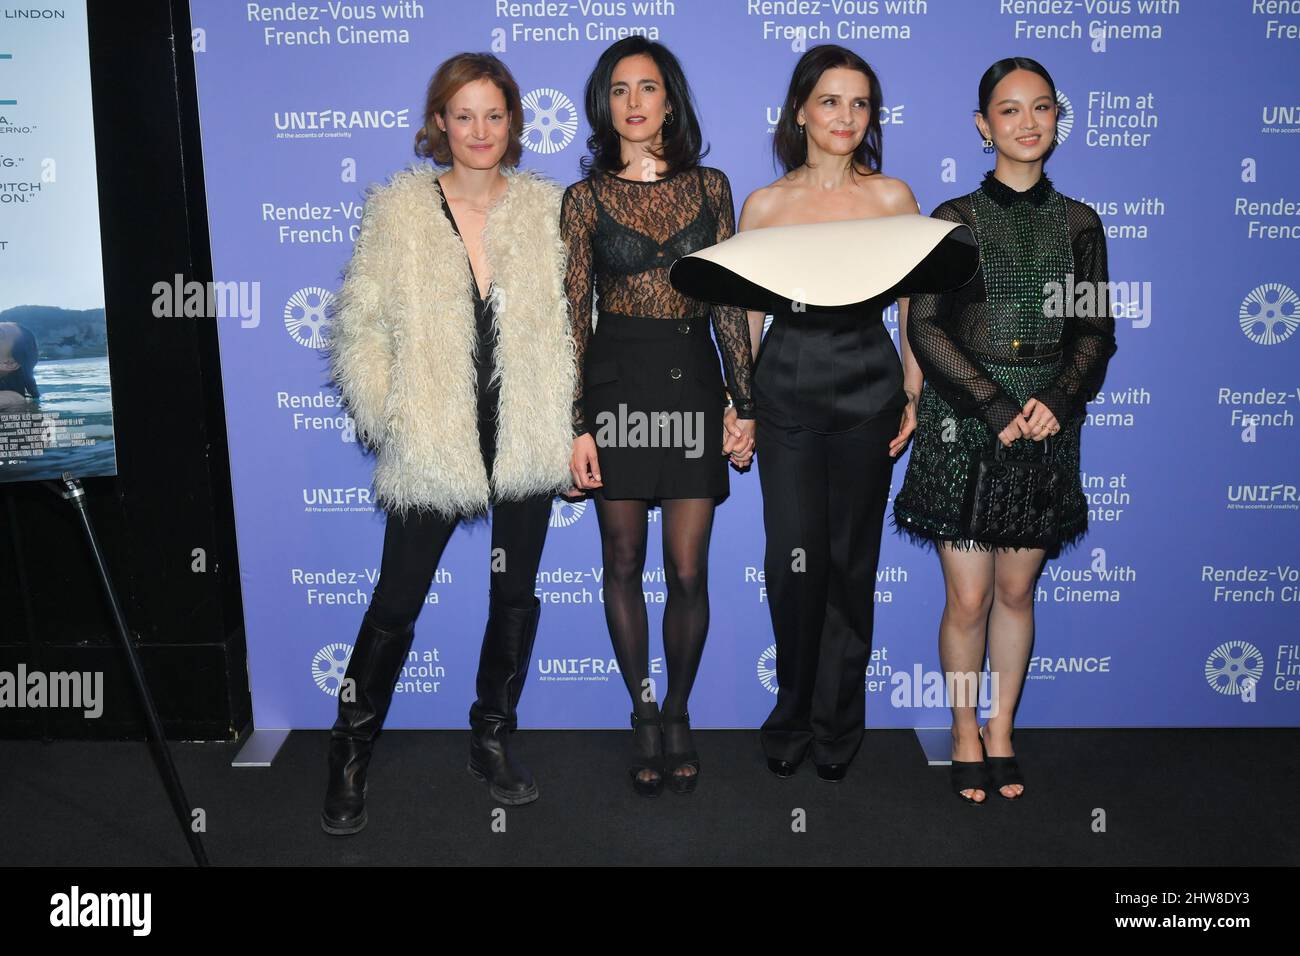 Vicky Krieps, Charline Bourgeois-Tacquet, Juliette Binoche and Lucie Zhang at Lincoln Center's Rendez-Vous With French Cinema opening night screening Stock Photo